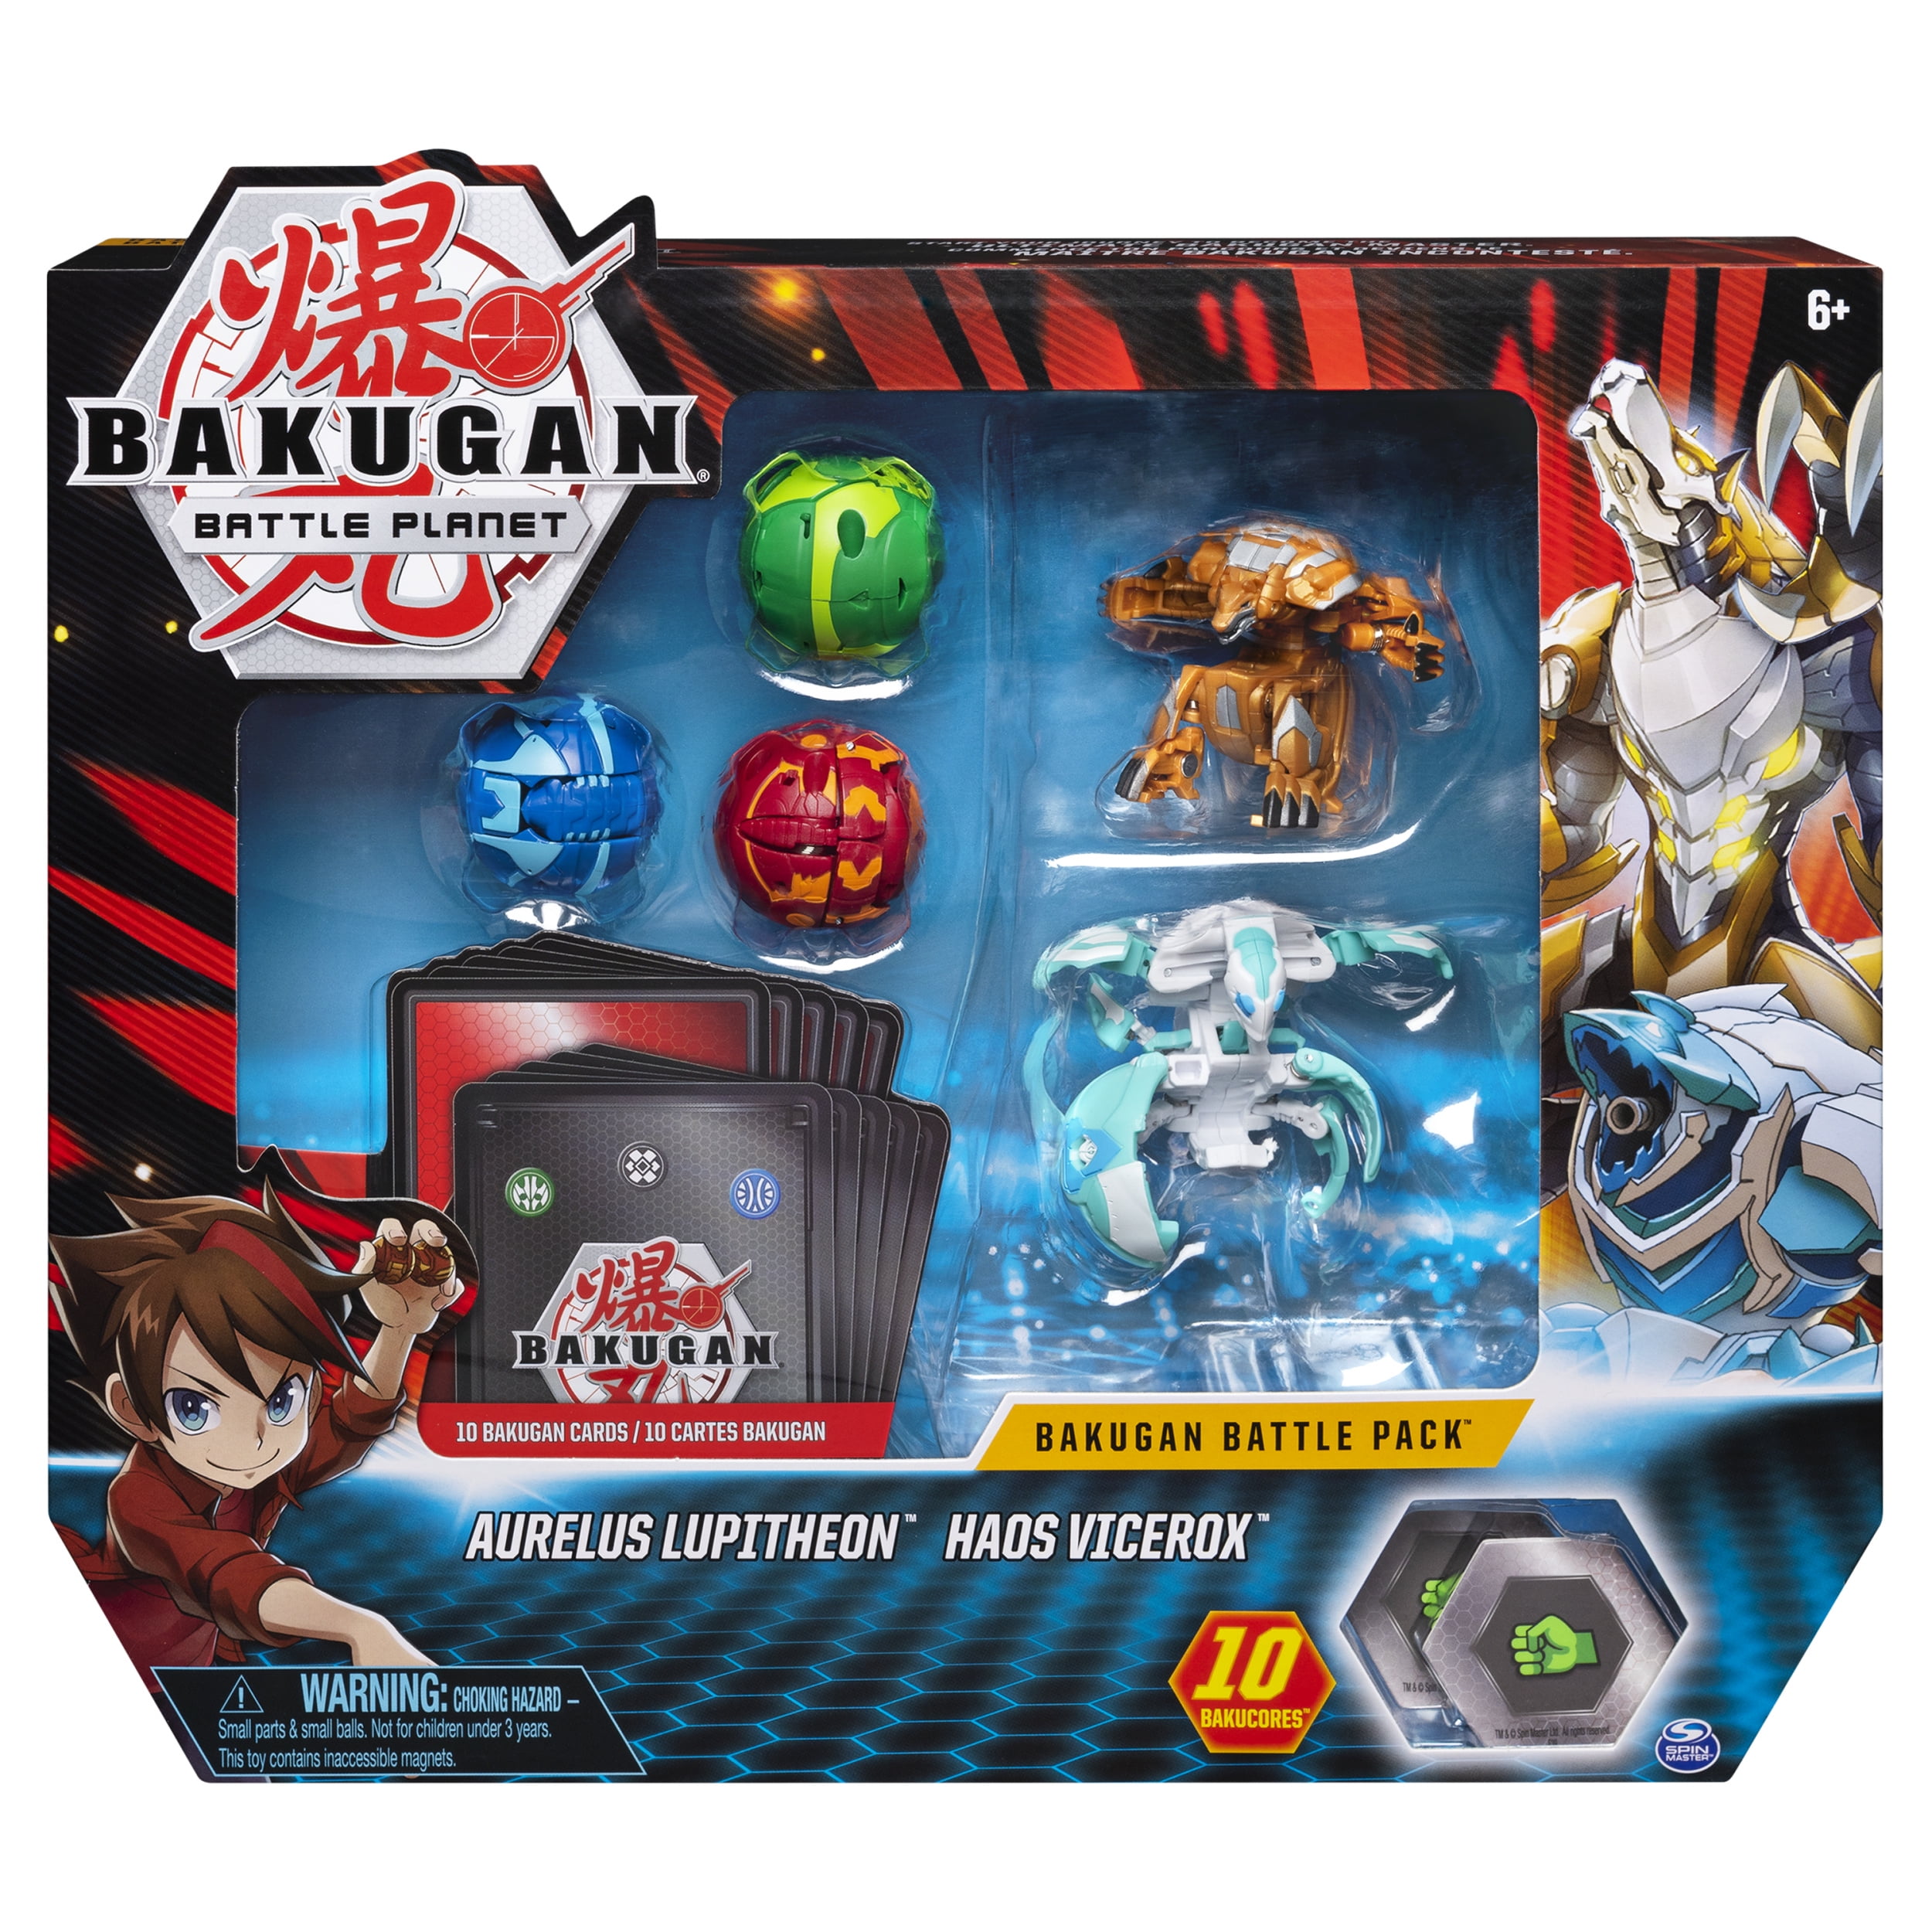 Styre Landbrugs stil Bakugan, Battle Pack 5-Pack, Aurelus Lupitheon and Haos Vicerox,  Collectible Cards and Figures, for Ages 6 and Up - Walmart.com